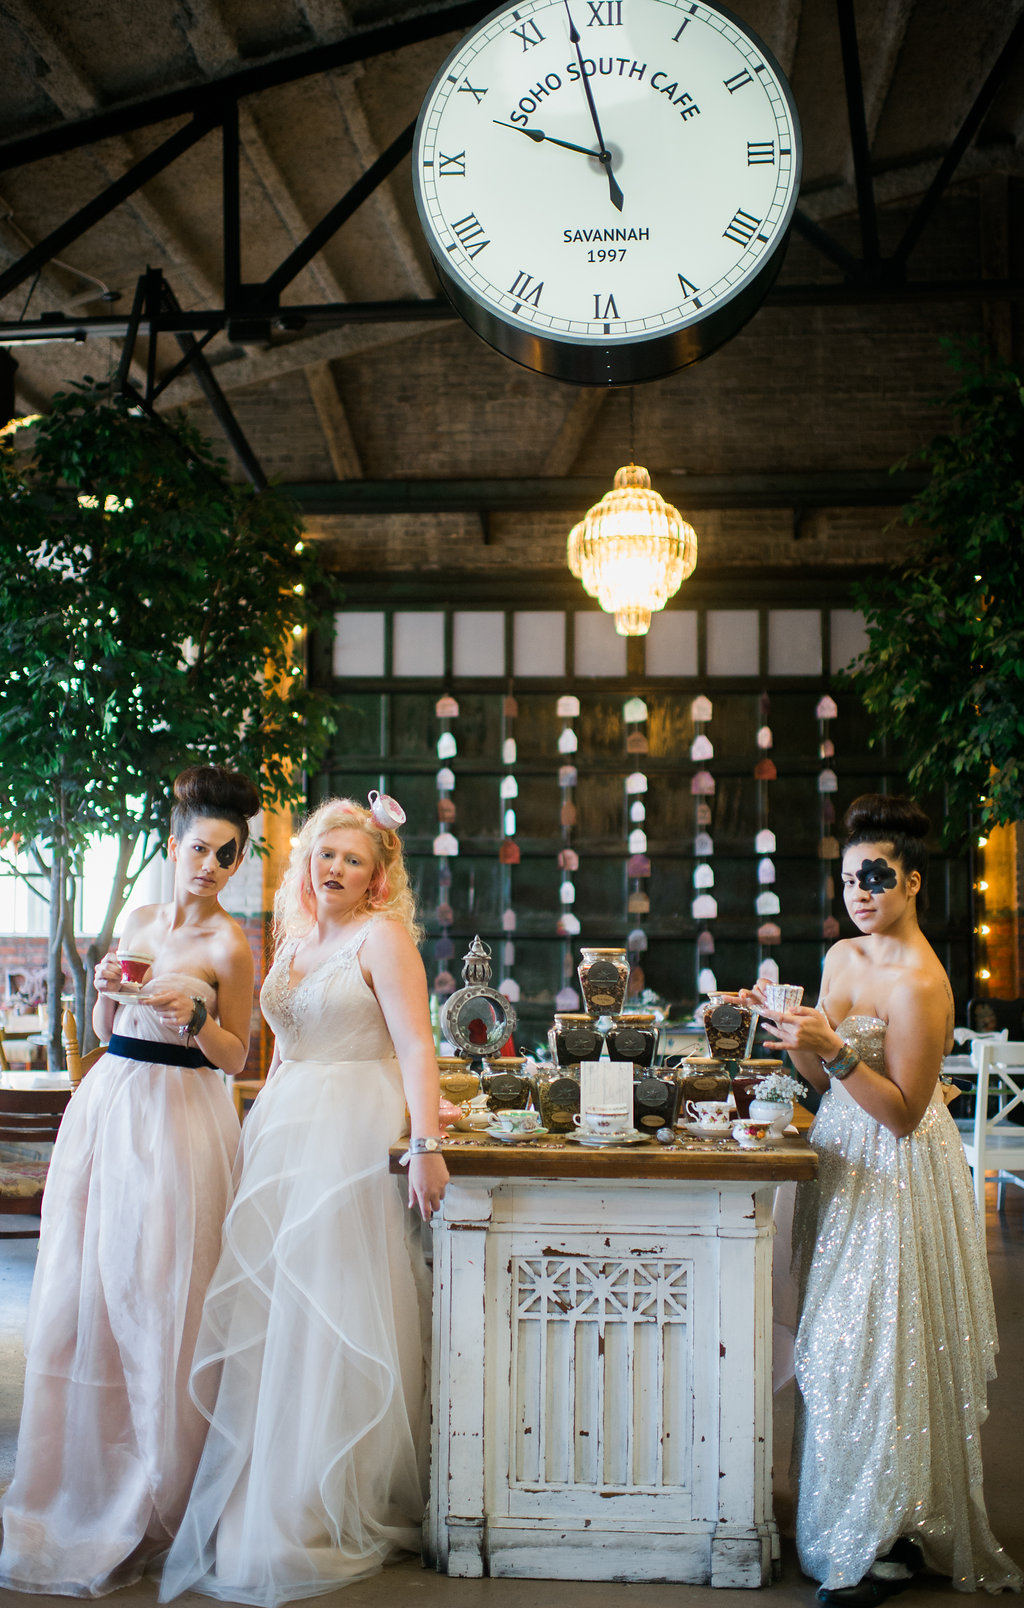 alice-in-wonderland-wedding-rach-lea-photography-rach-loves-troy-photography-ivory-and-beau-bridal-boutique-soho-cafe-savannah-wedding-venue-savannah-weddings-savannah-wedding-planner-sarah-seven-golden-lights-blushing-forever-september-12.jpg